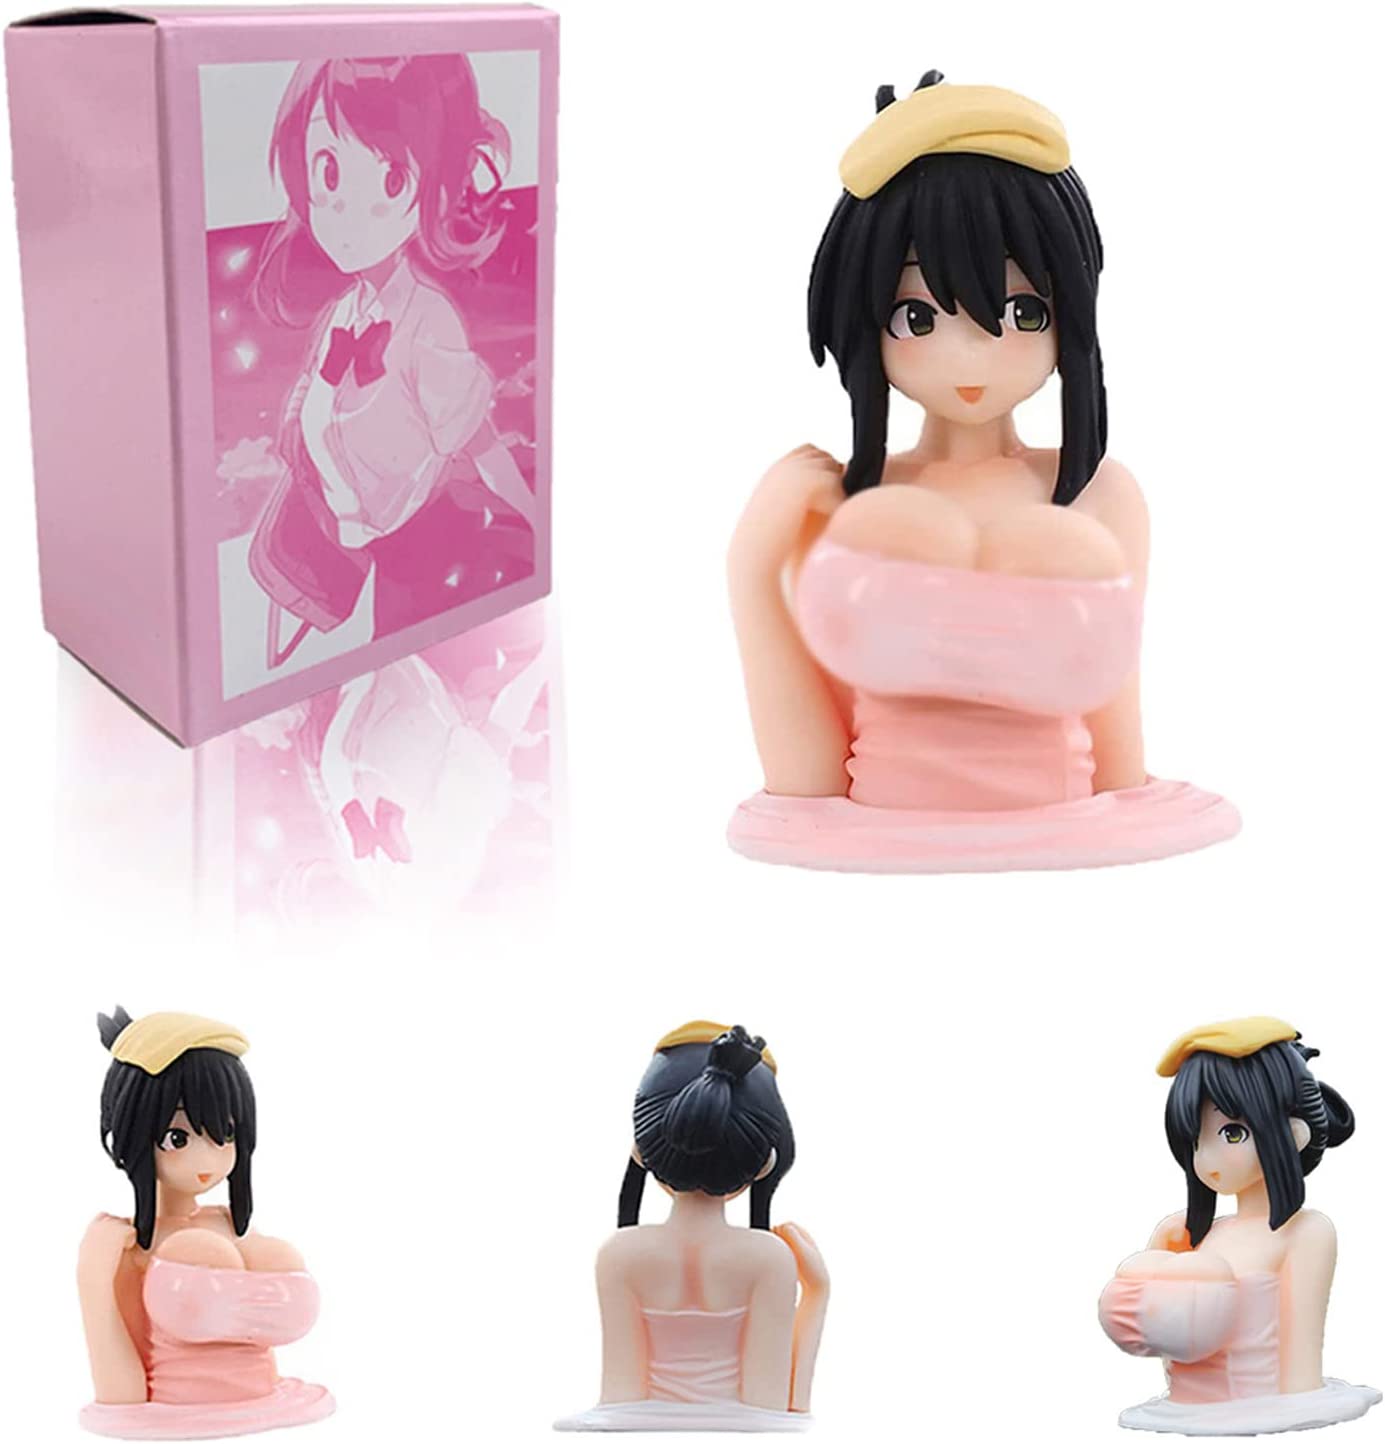 Cute Kanako Chest Shaking Ornaments Anime Doll Kawaii Anime Statue Sexy  Interior For Car Dashboard Bedroom Office Decorations